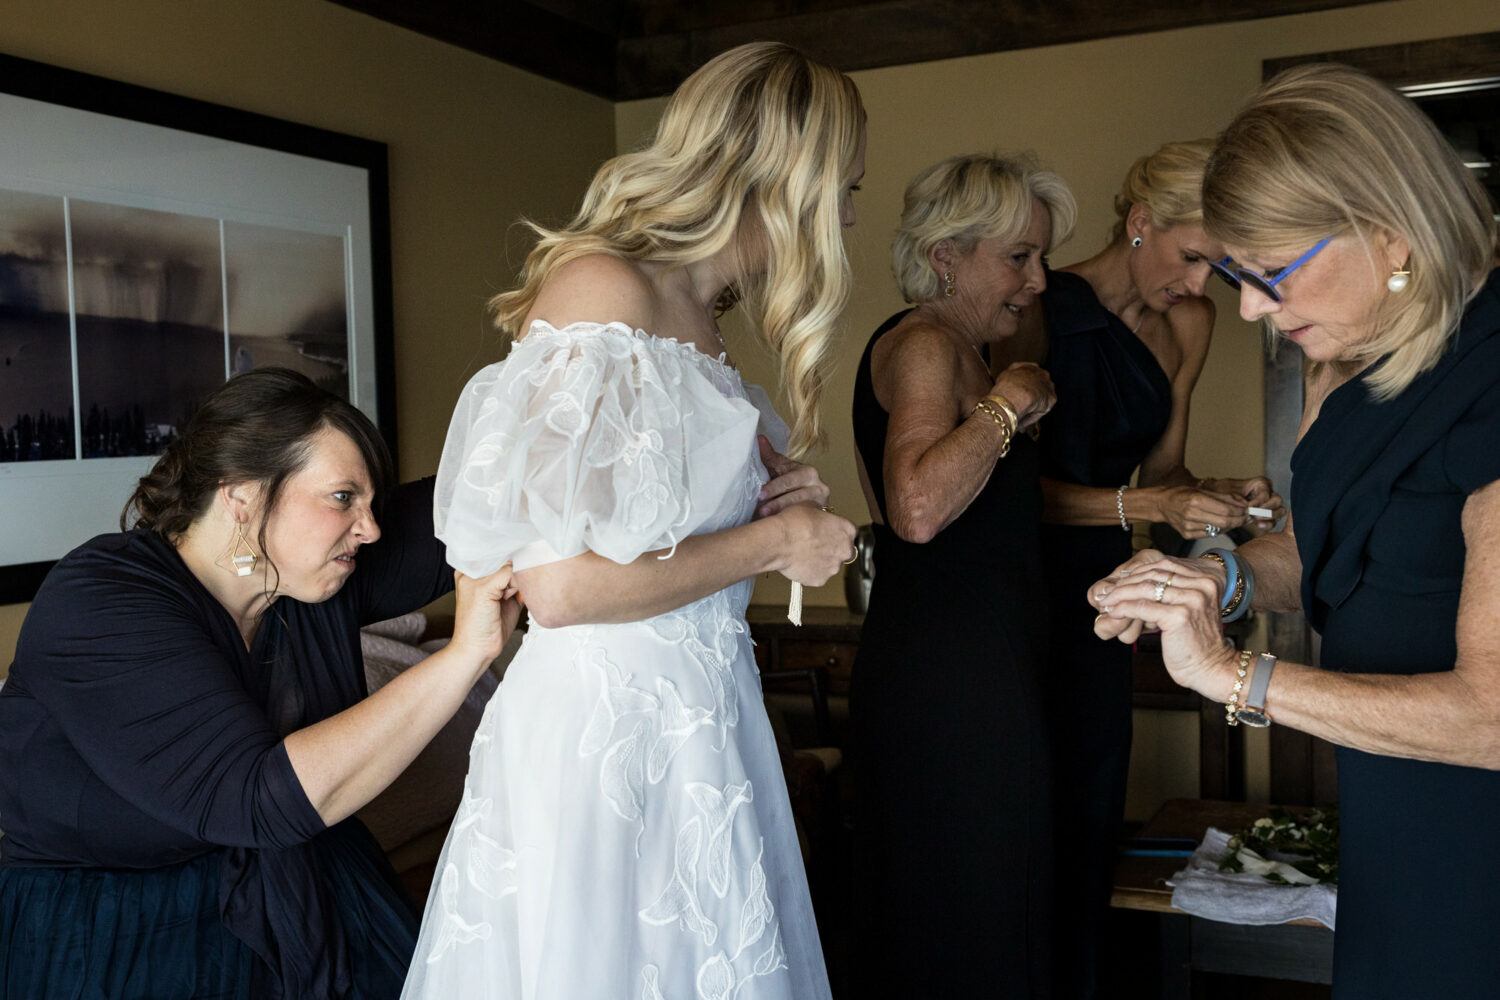 A bridesmaid struggles to button the back of a wedding dress with puff sleeves and lacy decorations.